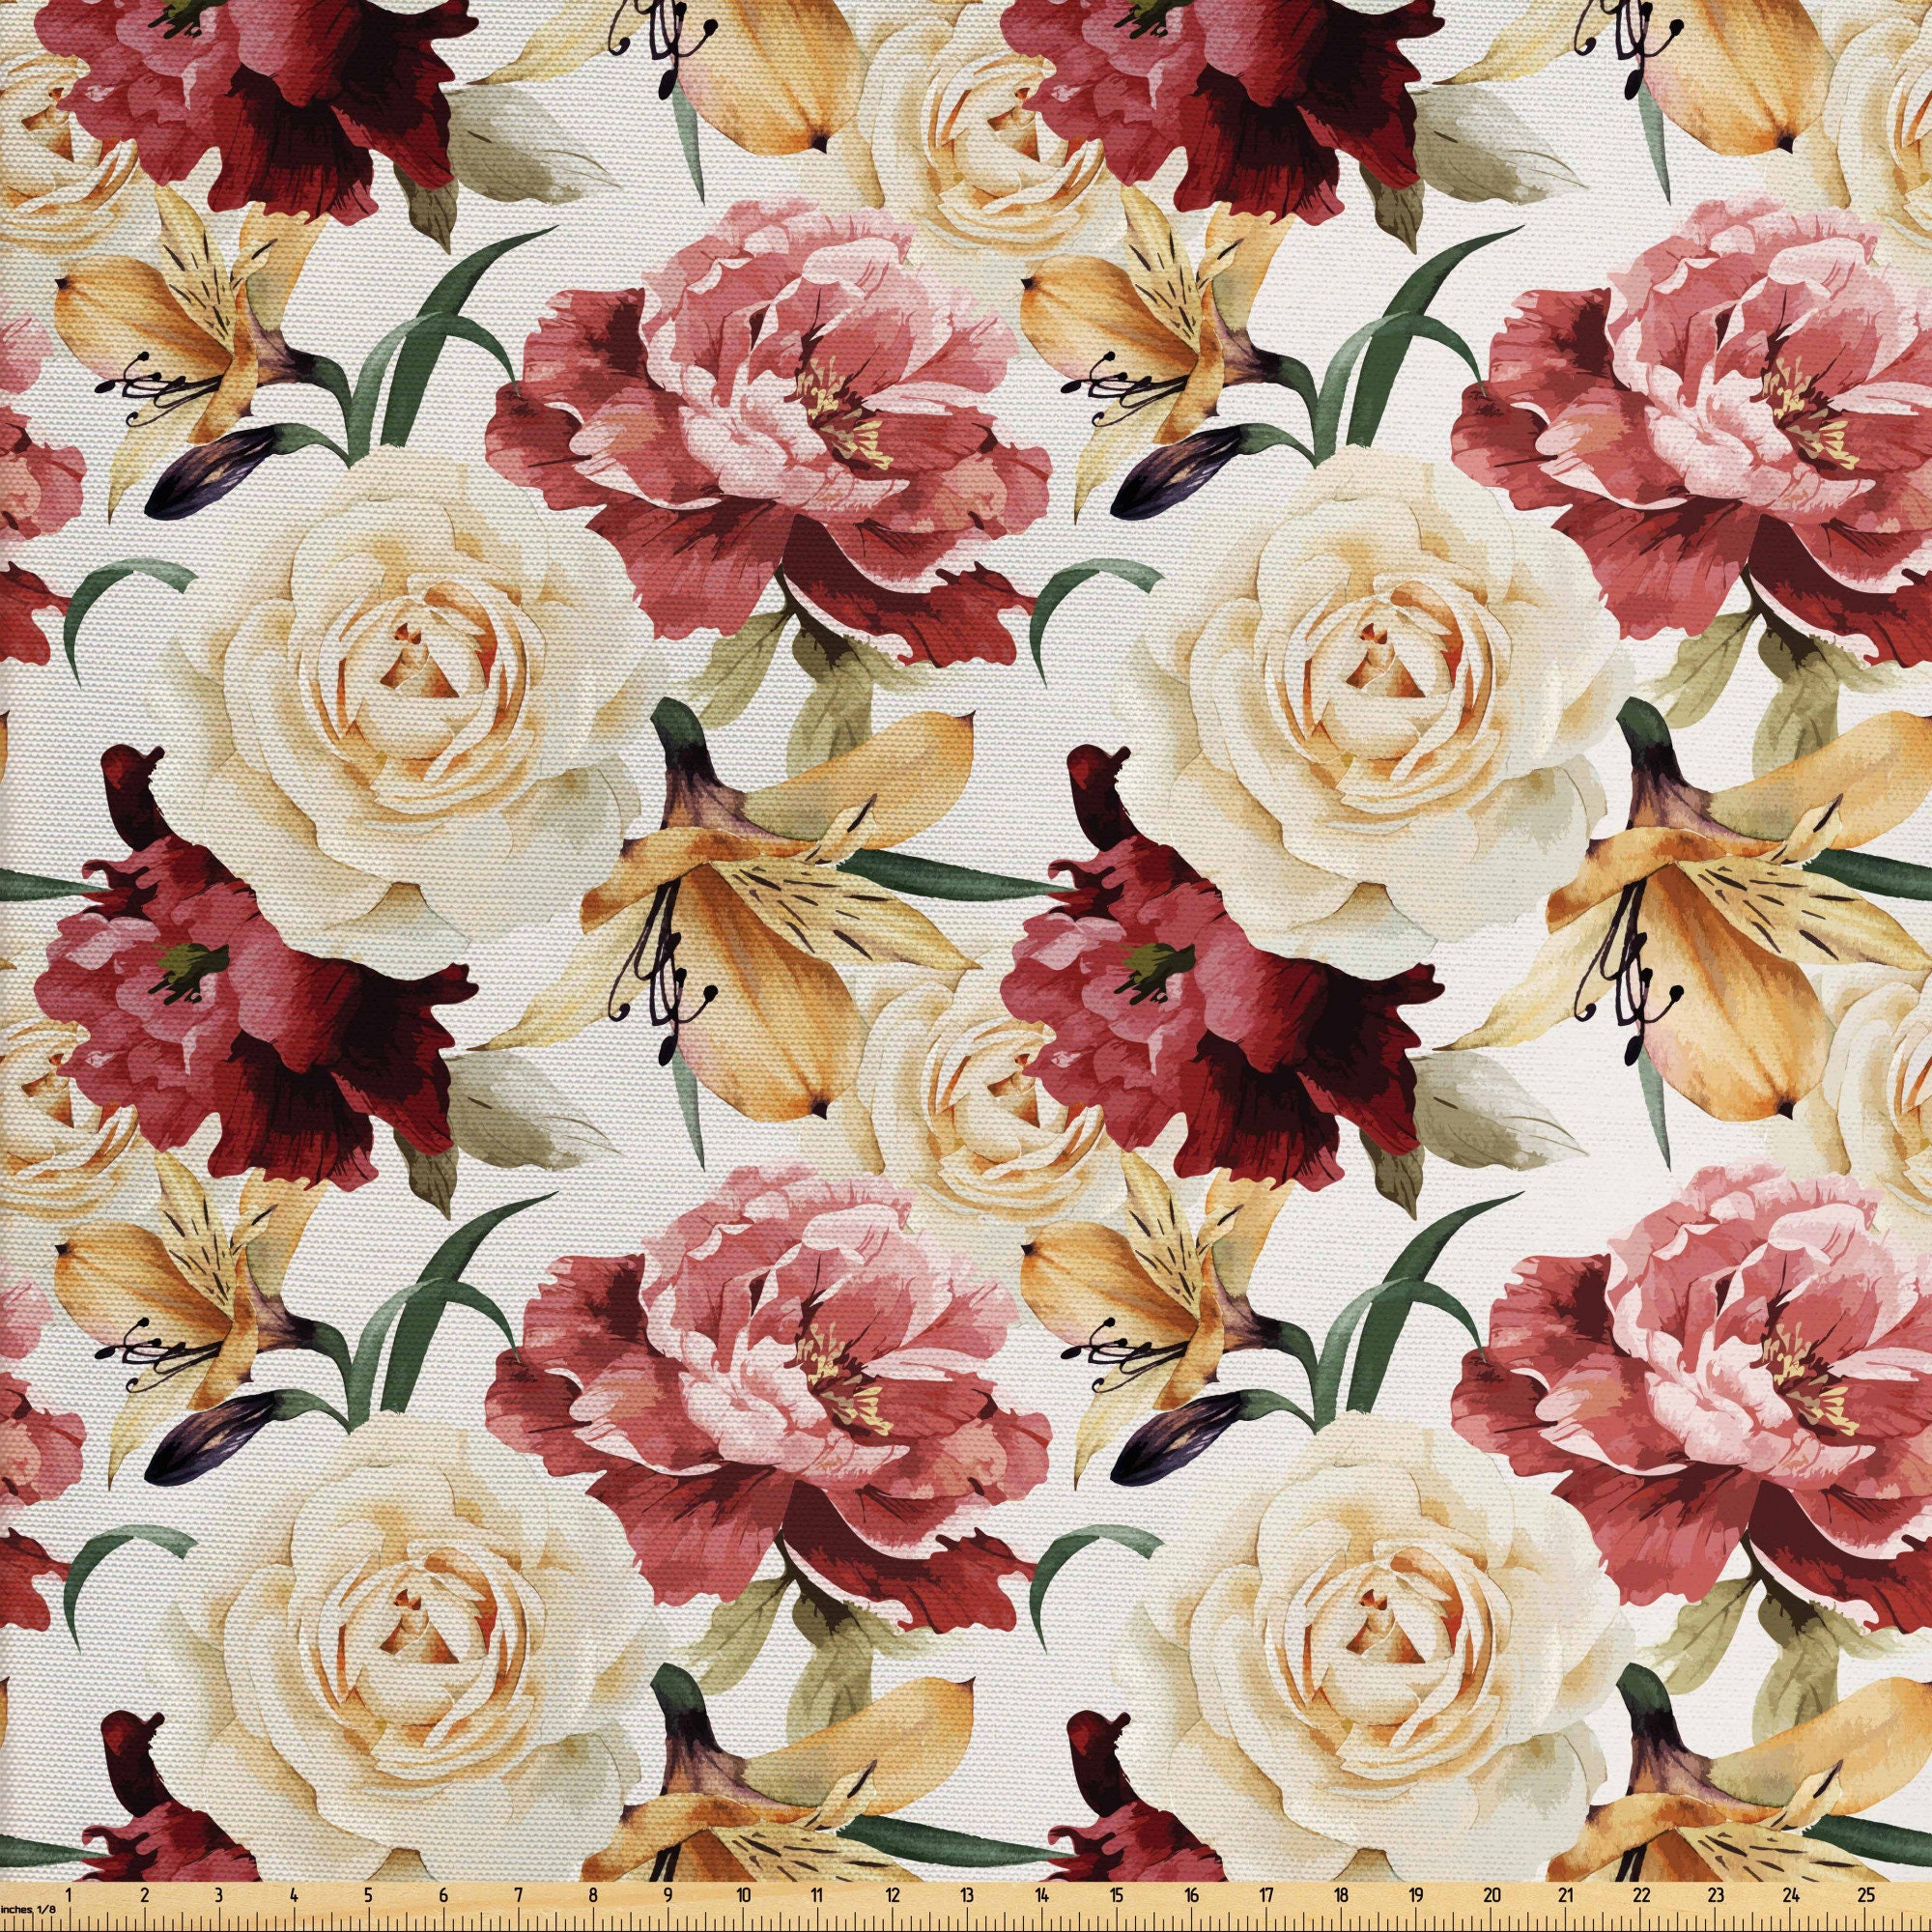 Rose Fabric by the Yard Skulls Red Roses Floral Fable Joy - Etsy